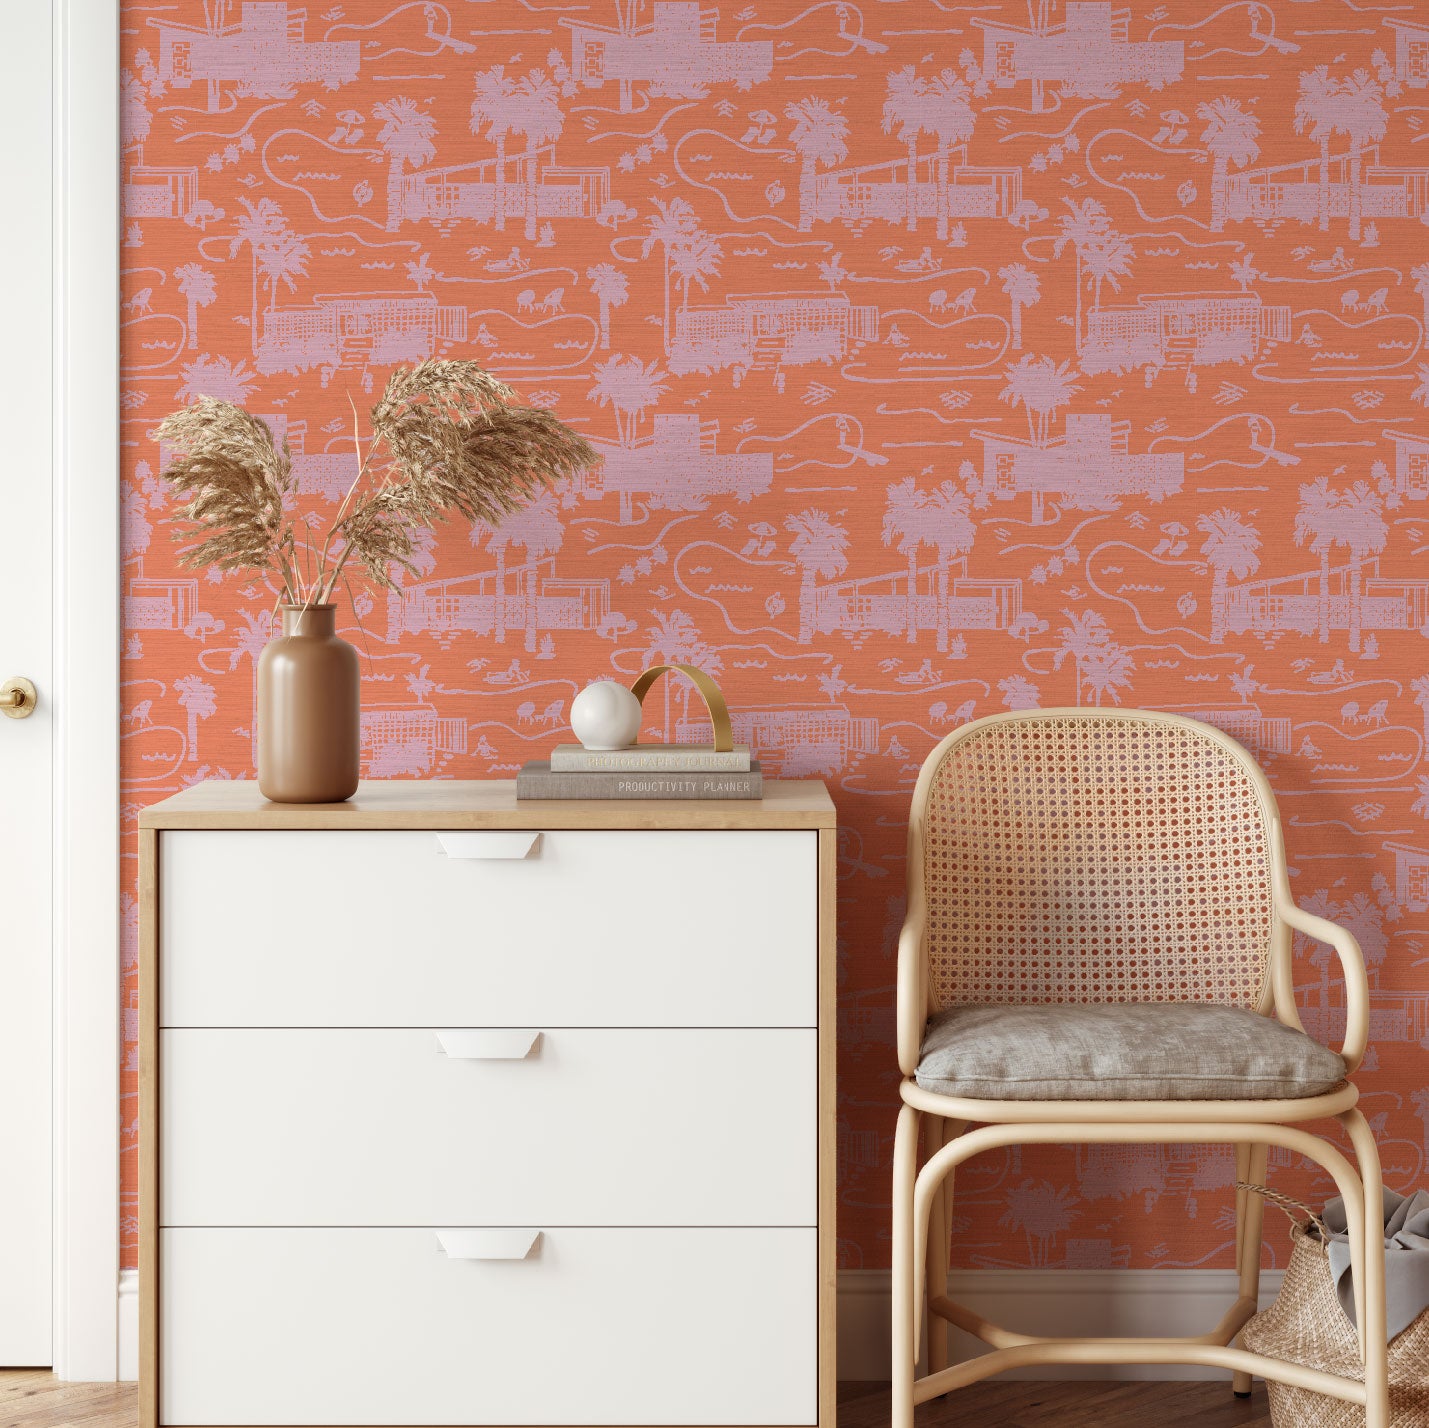 Load image into Gallery viewer, dresser and chair in front of grasscloth toile printed wallpaper with mid century modern houses inspired by palm springs featuring swimming pools, palm trees and secret suntanning ladies in this hand drawn one color printed design with coral base and light pink print
